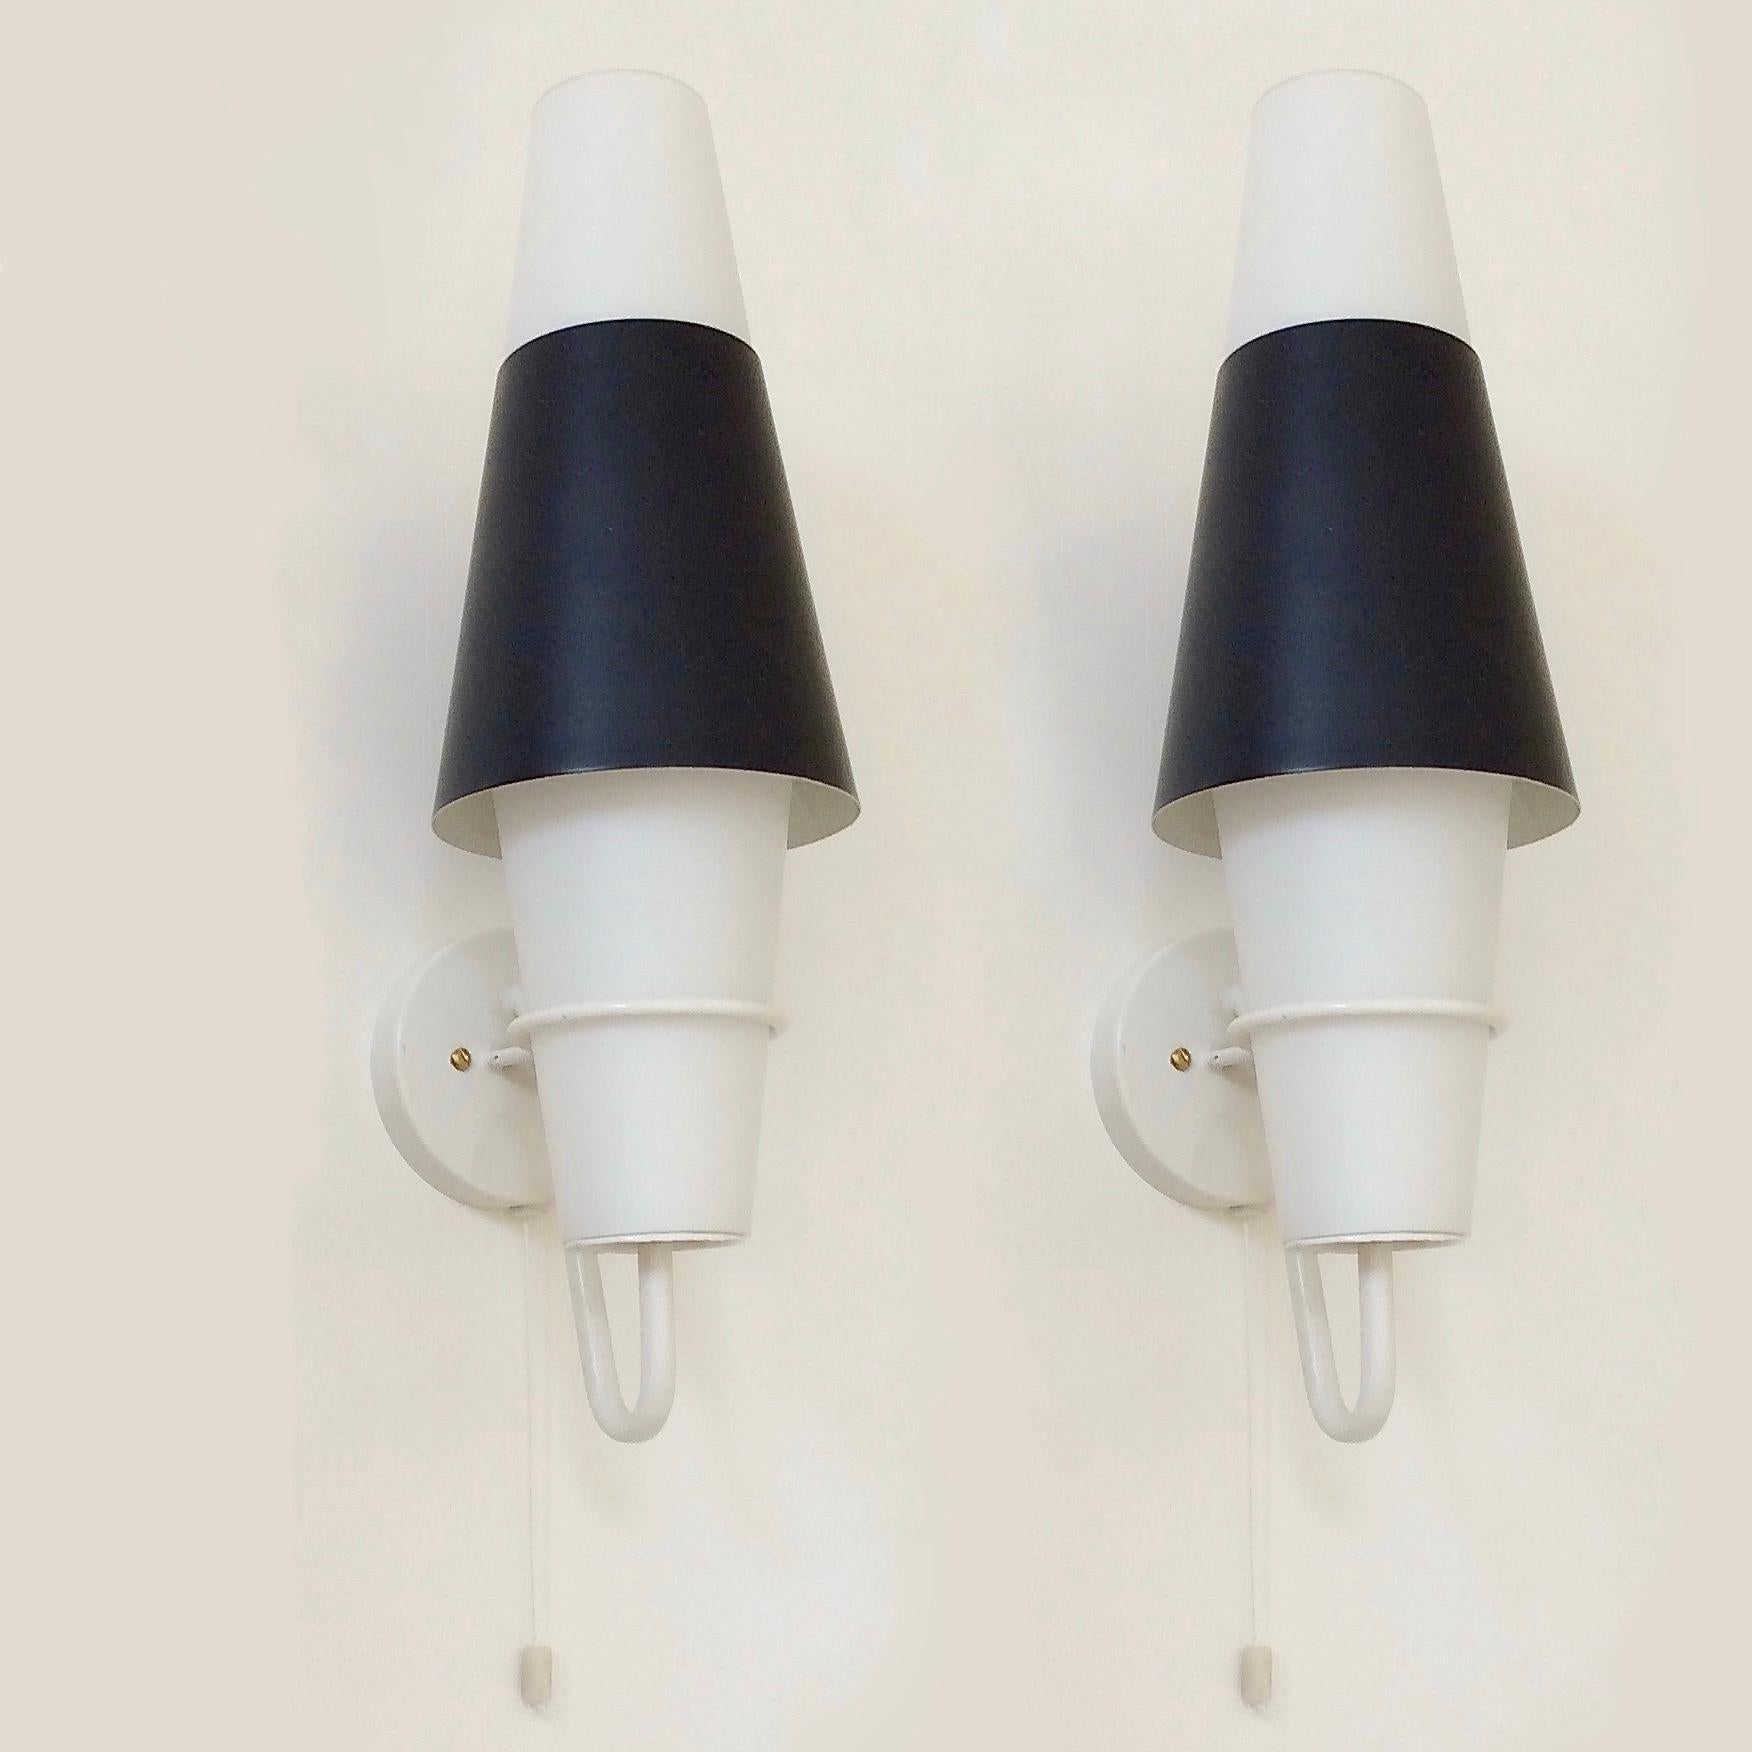 Nice pair of 1950s sconces, black lacquered metal, white painted metal,
opaline, switch cord.
One E14 bulb of 40 W.
Measures: H 42 cm, W 13 cm, D 15 cm.
Good original condition.
All purchases are covered by our buyer protection